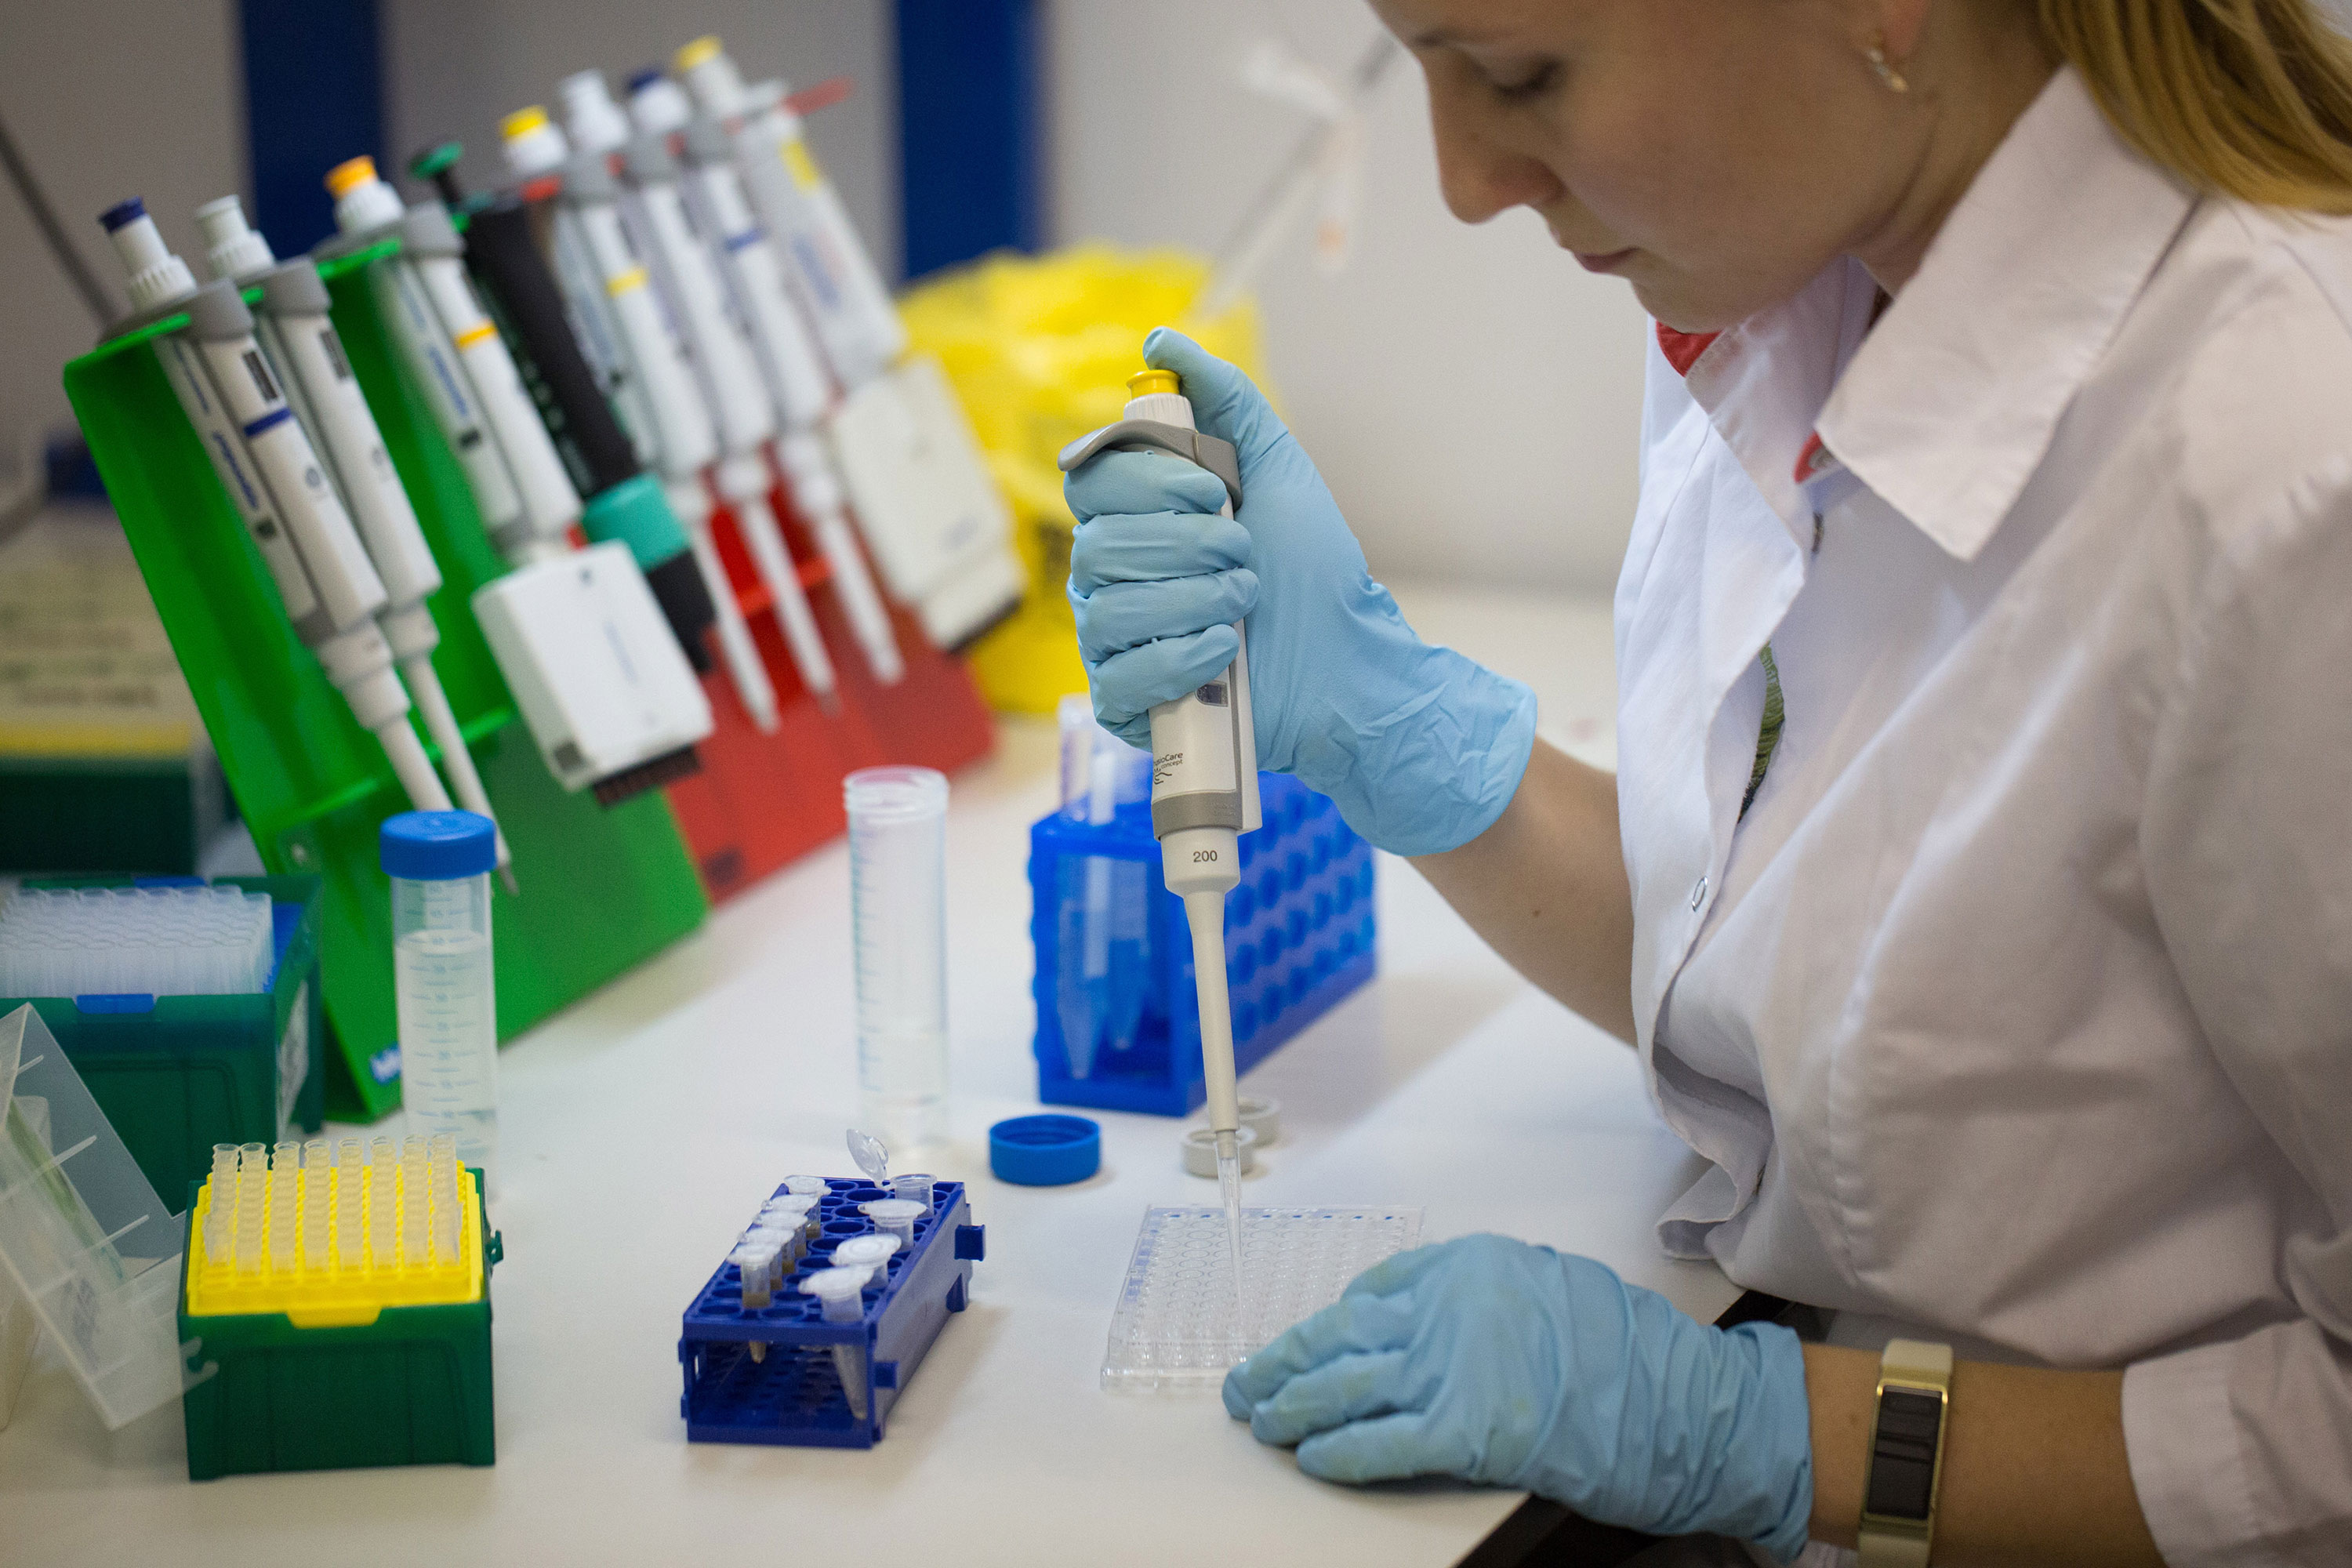 A lab technician works on production of the 'Medgamal' Covid-19 vaccine, developed by the Gamaleya National Research Center for Epidemiology on August 6 in Moscow, Russia.